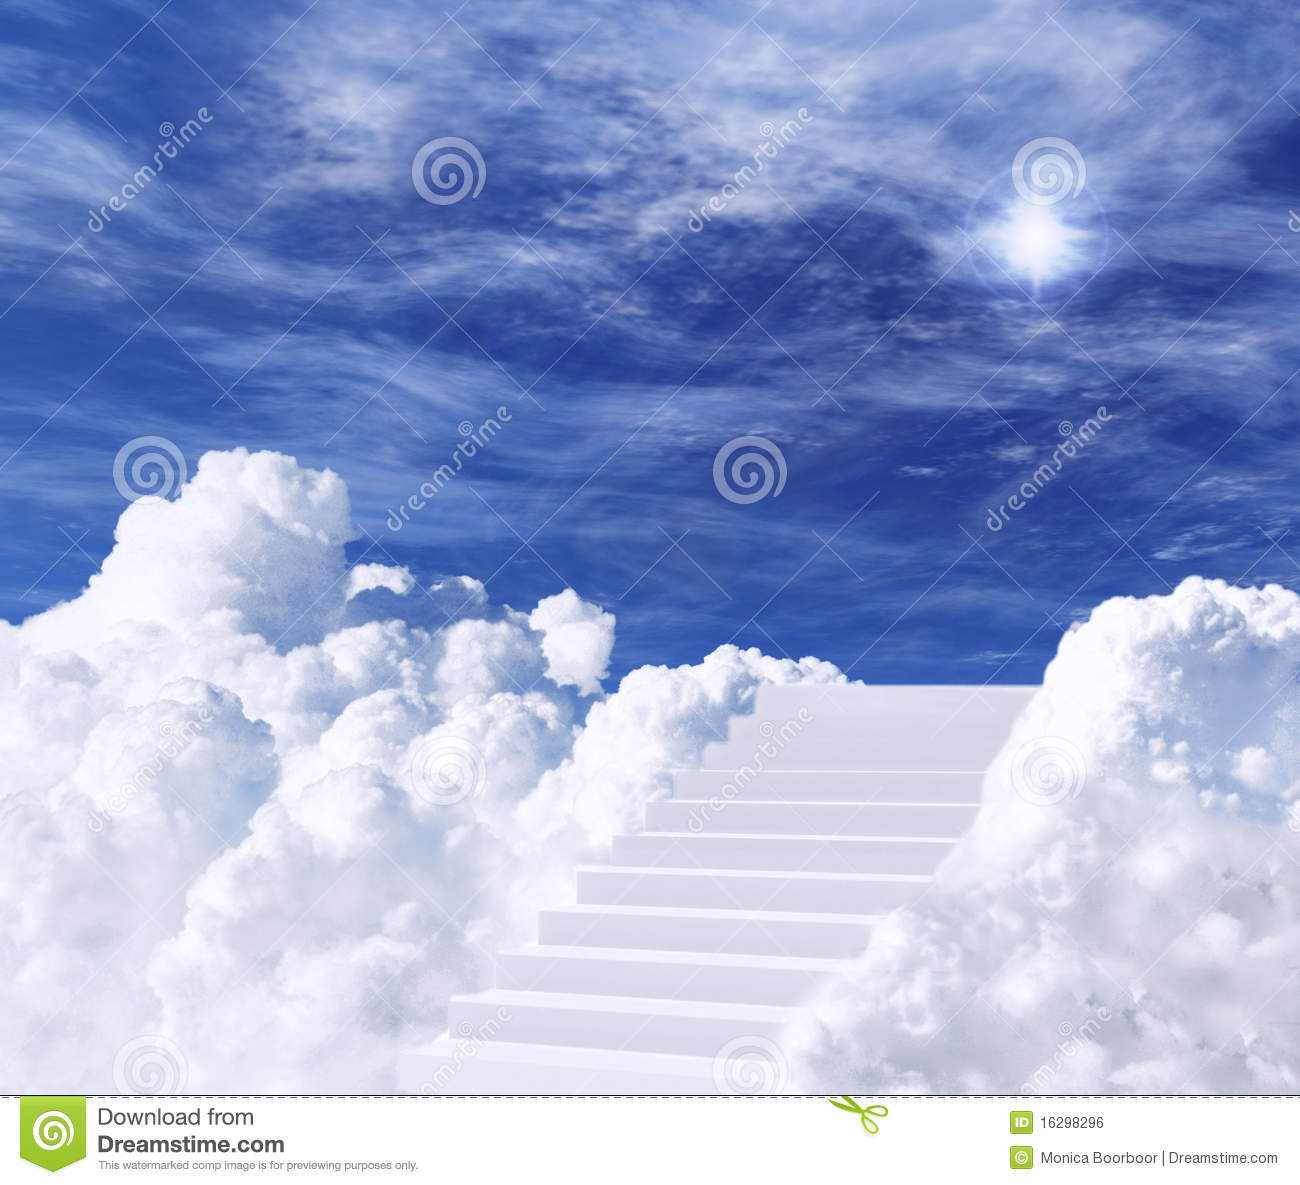 Illustration Of Concept Of Stairs In Clouds Going To Heaven Faith